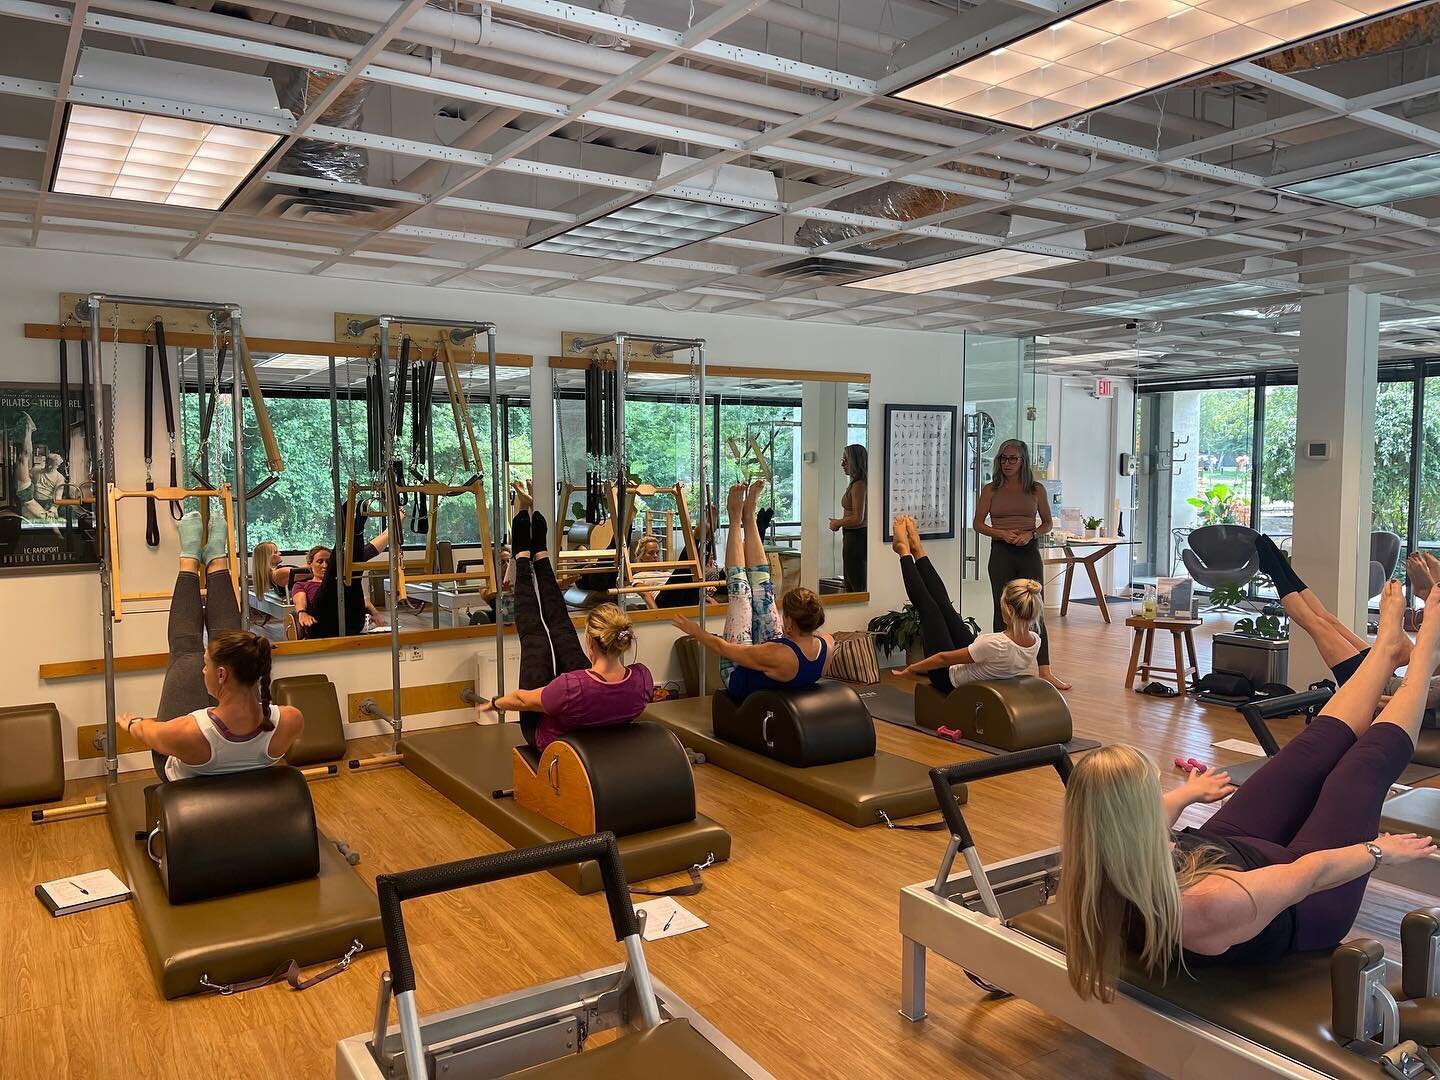 Big Thank You to Claudia King owner of  @darienpilates in CT for hosting our 3rd Free Pilates Community Education Project!

I know that&rsquo;s a lot to say but making time for teachers and Pilates enthusiasts to get together, move, learn, laugh, and